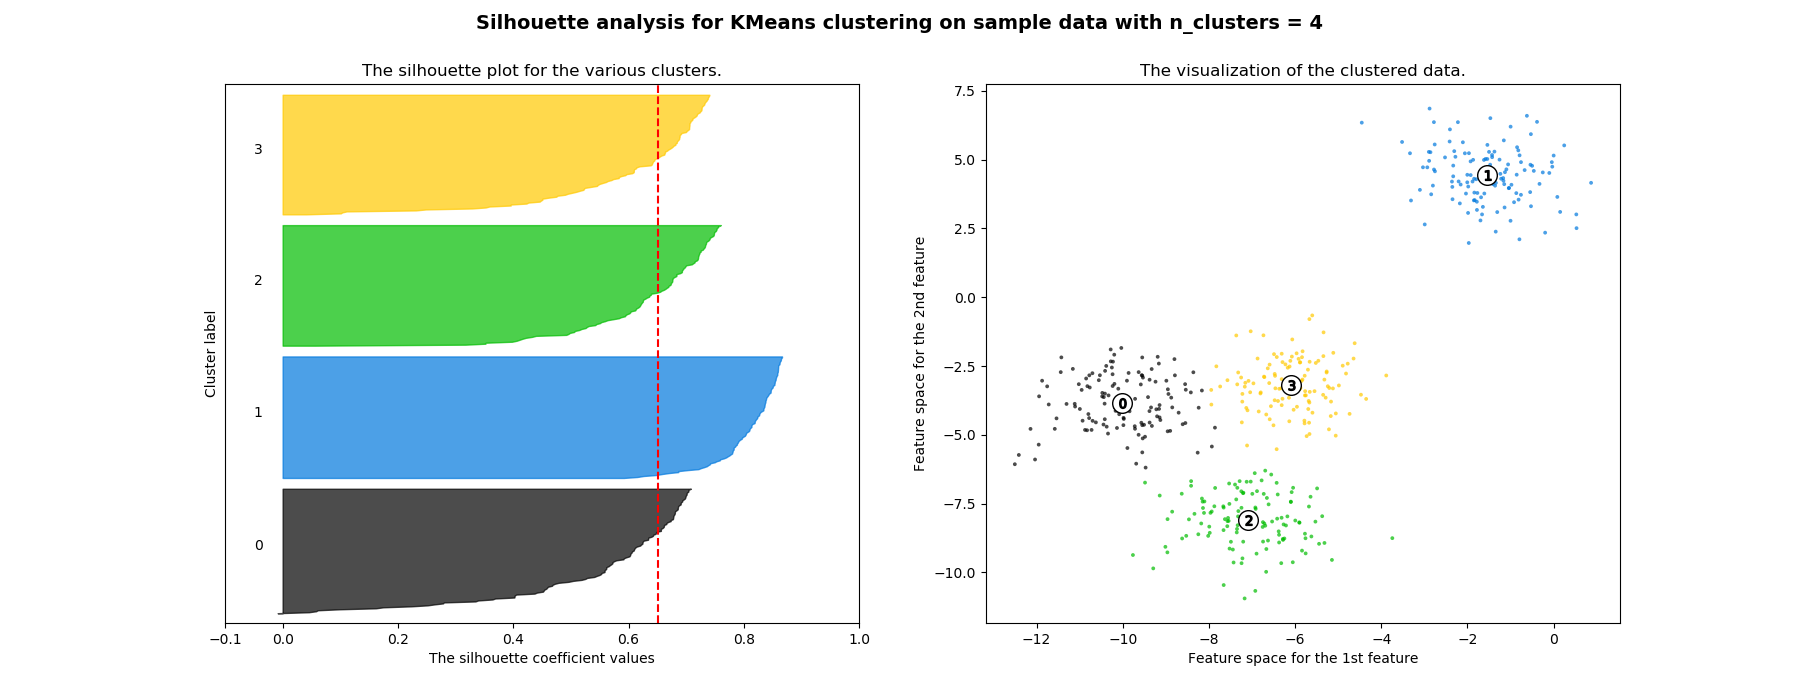 ../../_images/sphx_glr_plot_kmeans_silhouette_analysis_003.png